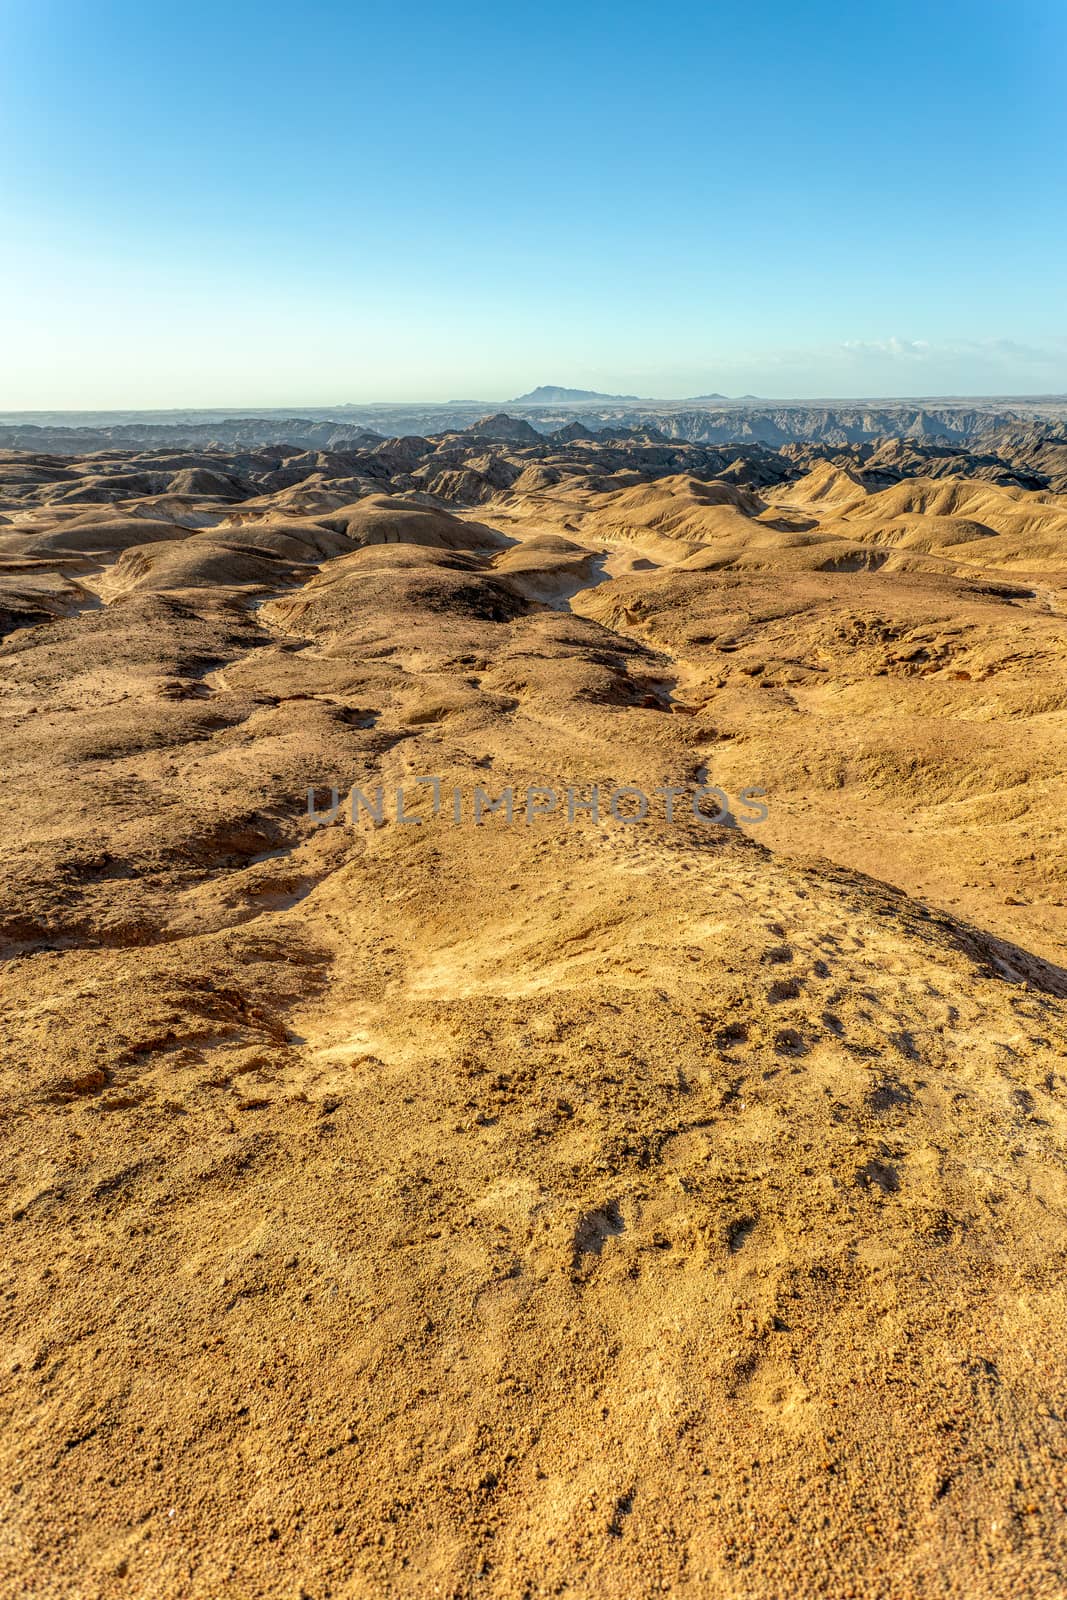 hilly landscape in Namibia near Swakopmund, looks like moonscape, Namibia Africa wilderness